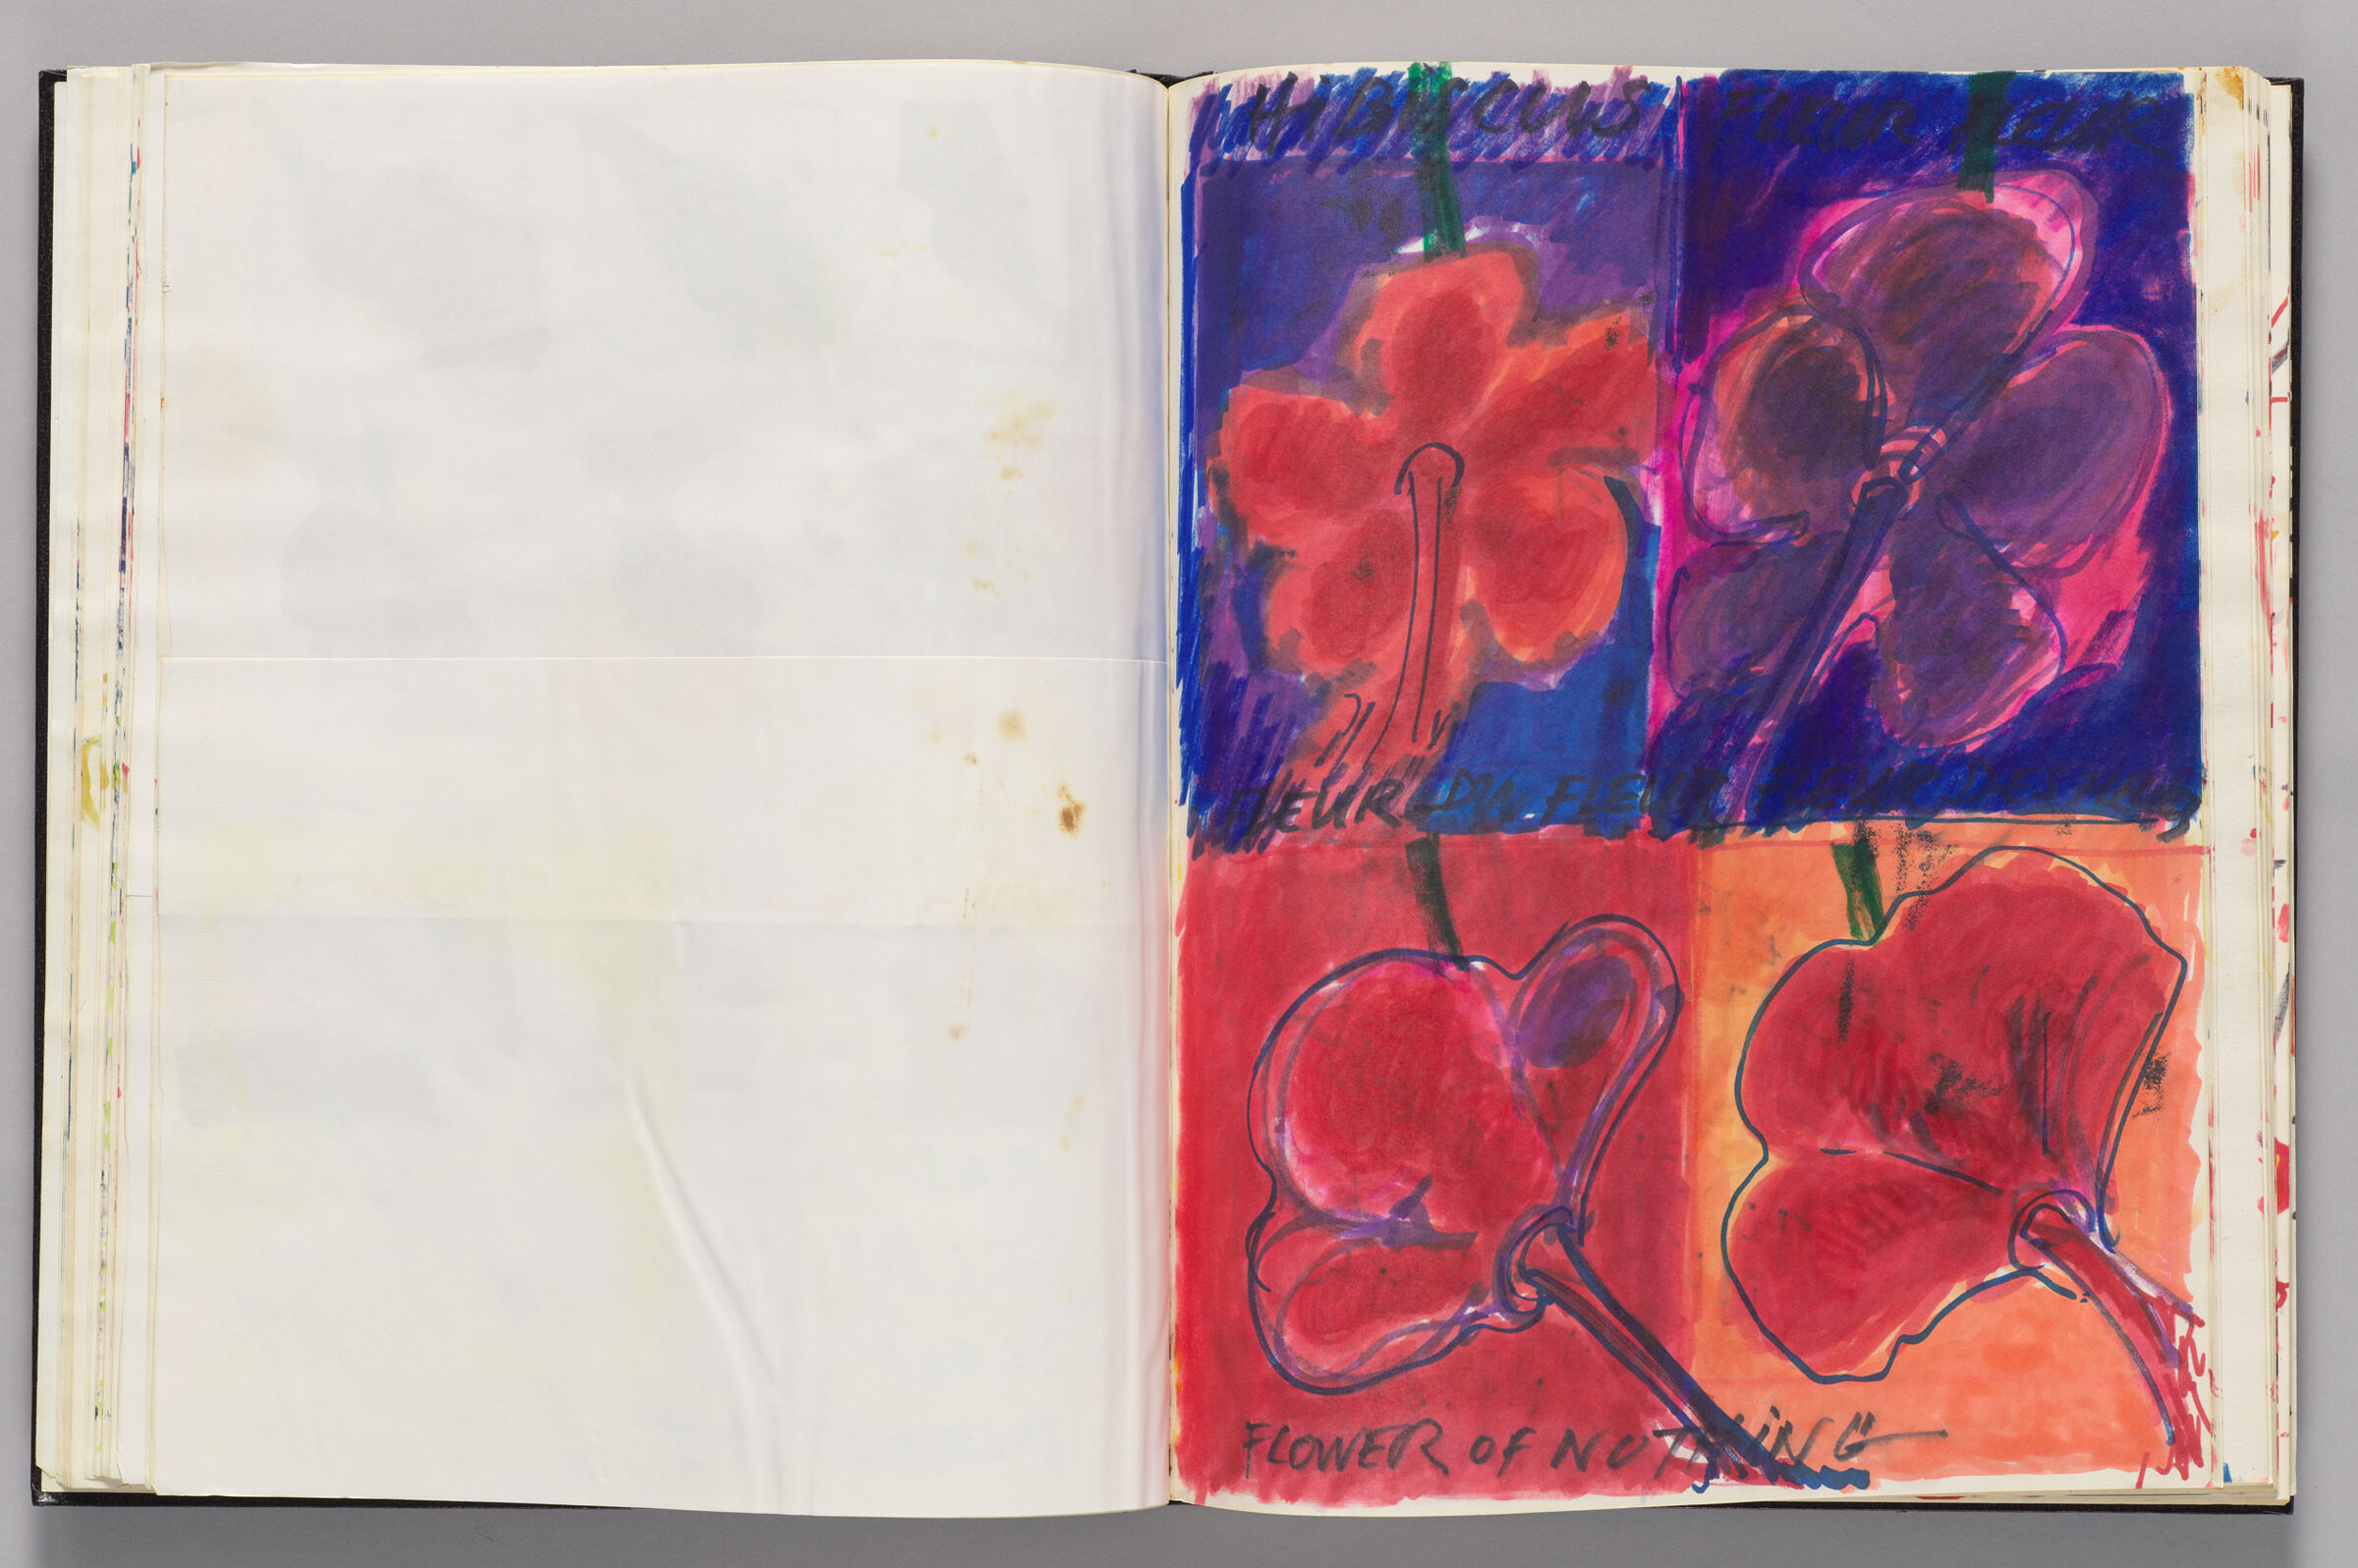 Untitled (Blank, Left Page); Untitled (Hibiscus/Flower Of Nothing, Right Page)